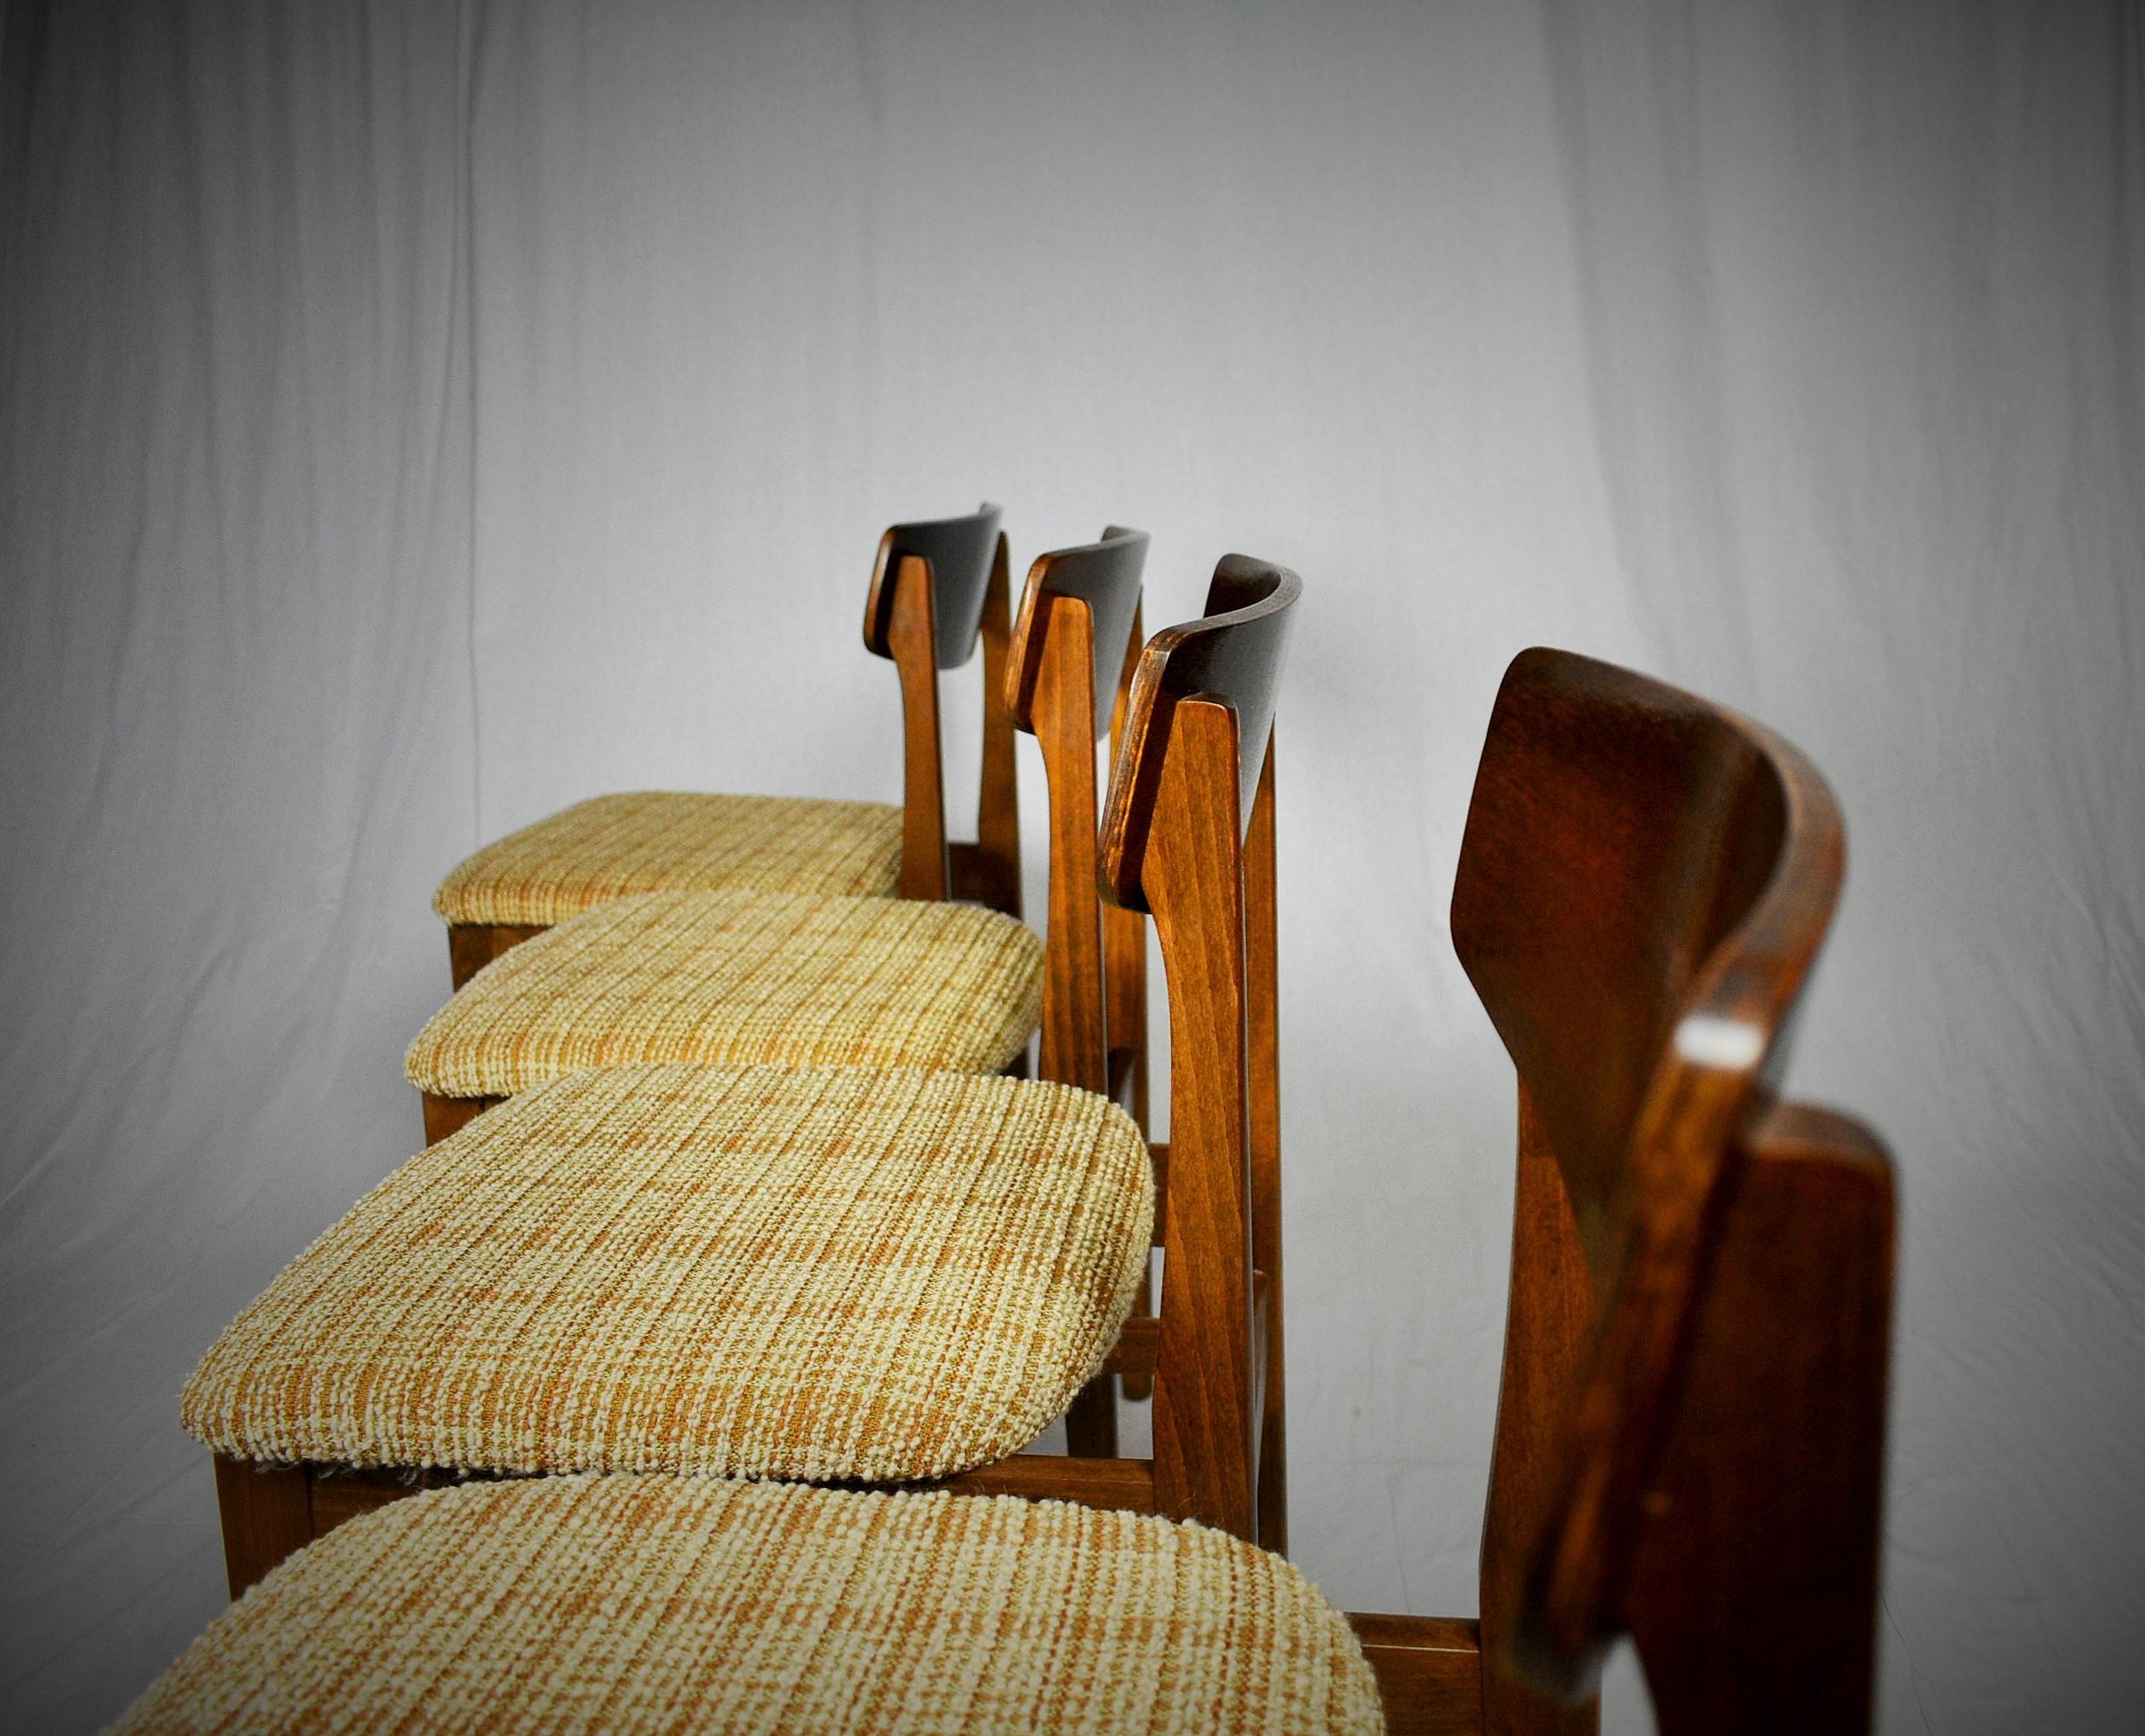 1960s Set of Four Dining Chairs, Czechoslovakia For Sale 3